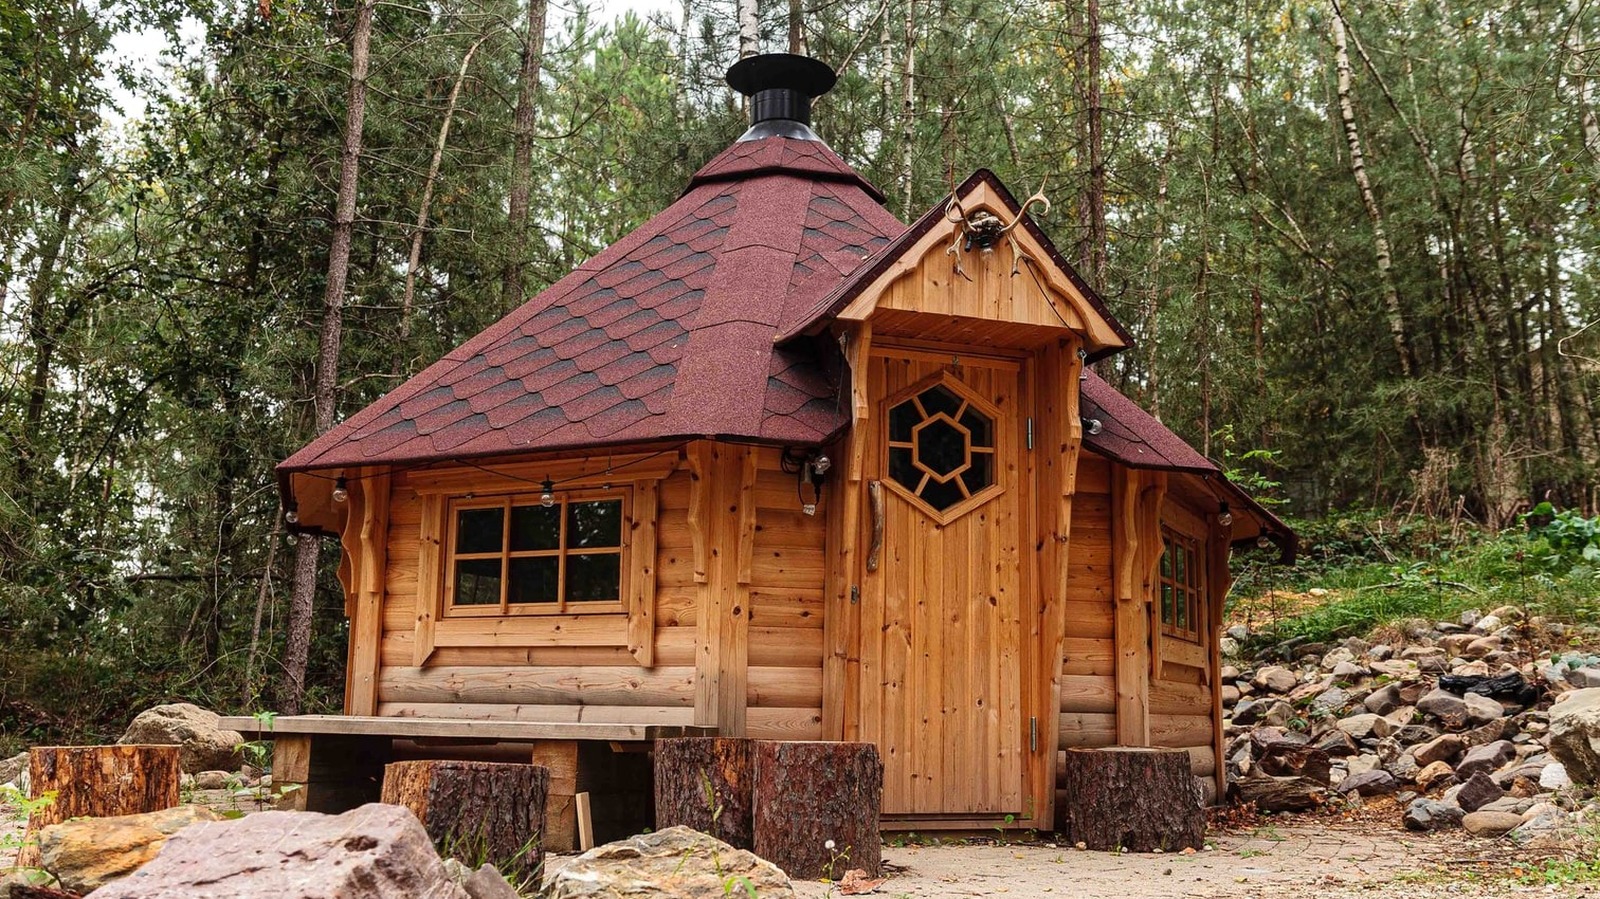 How to build a small cabin in the woods